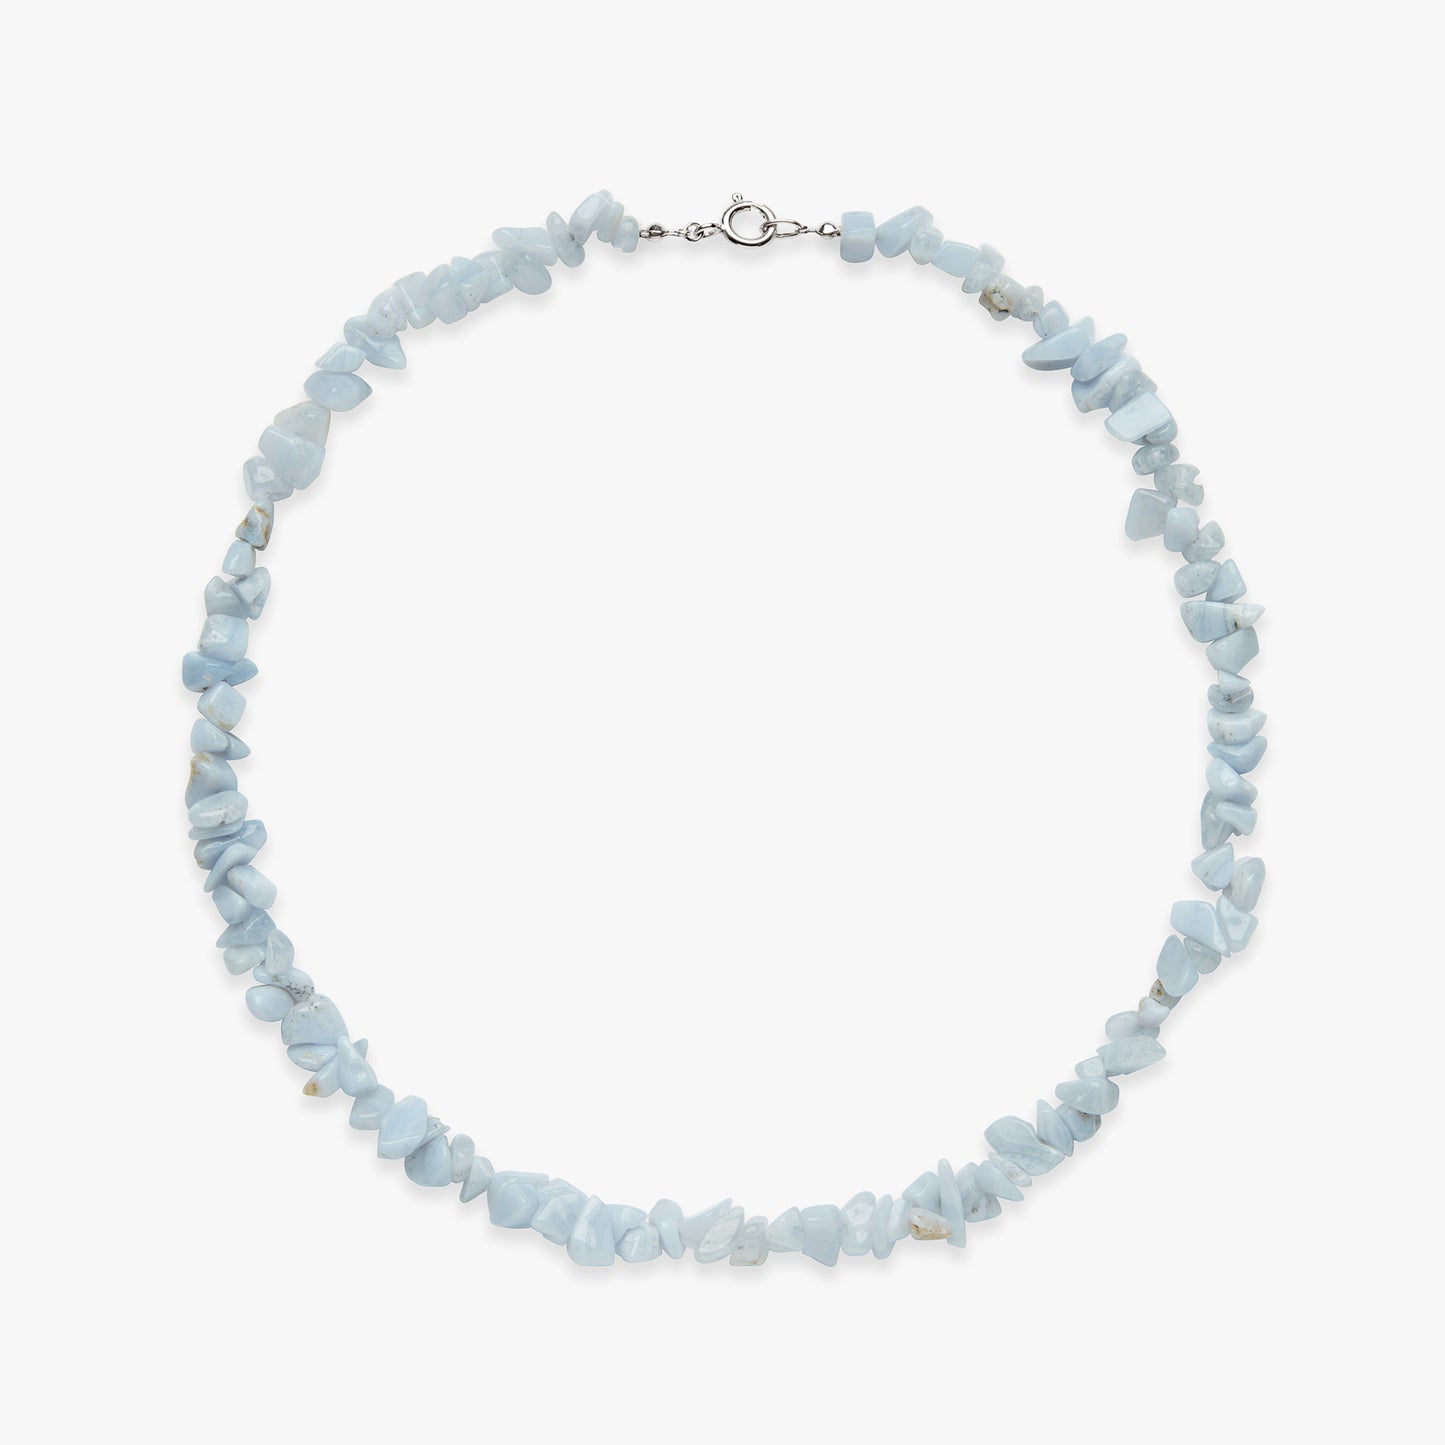 Laad afbeelding in Galerijviewer, Lily Tears blue lace ketting zilver
